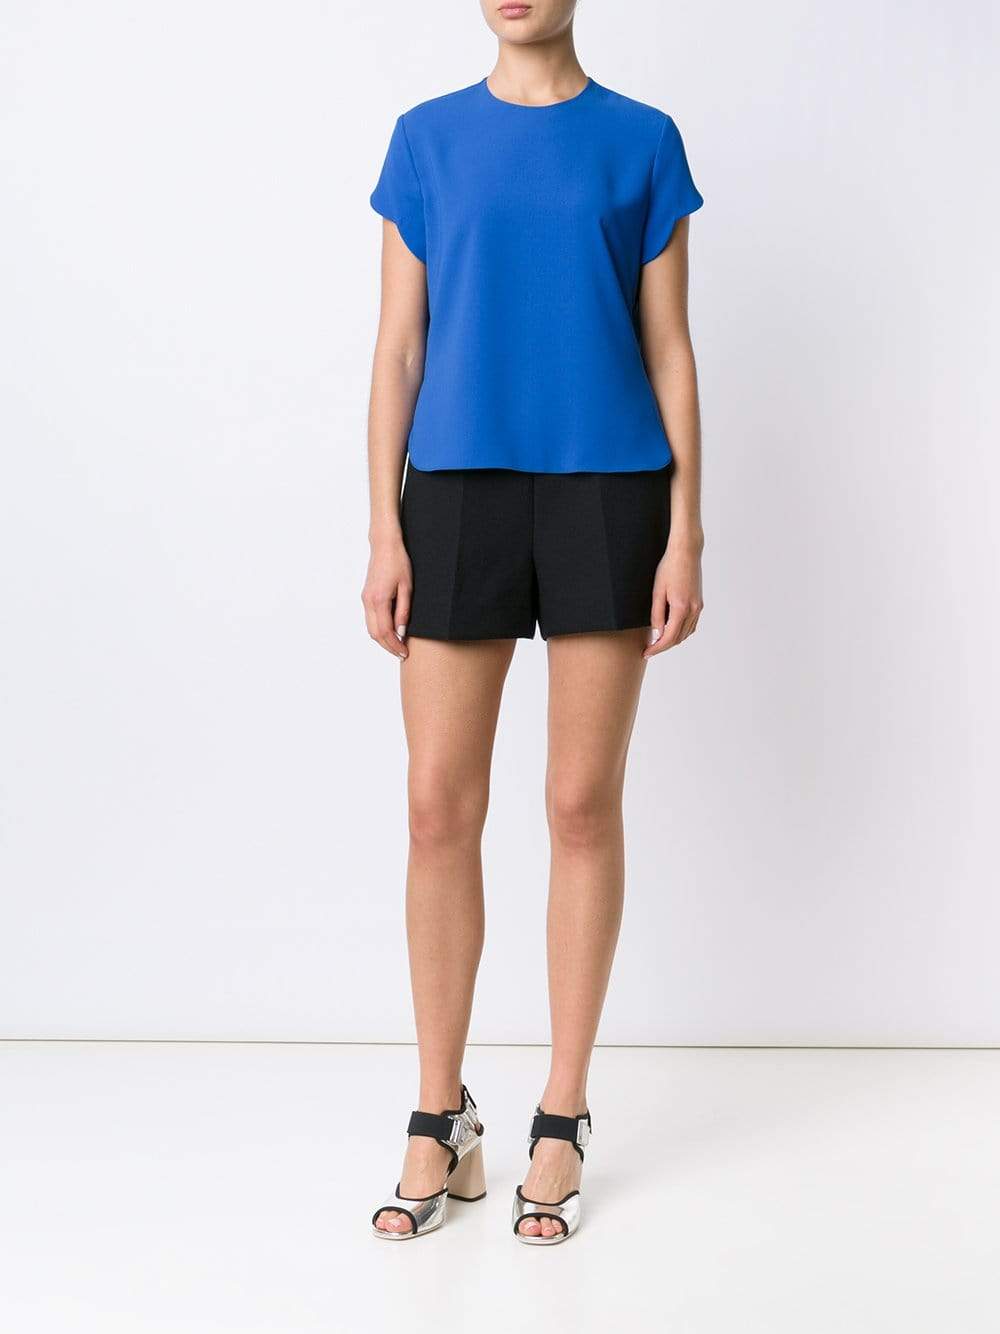 CARVEN-Cady Top-